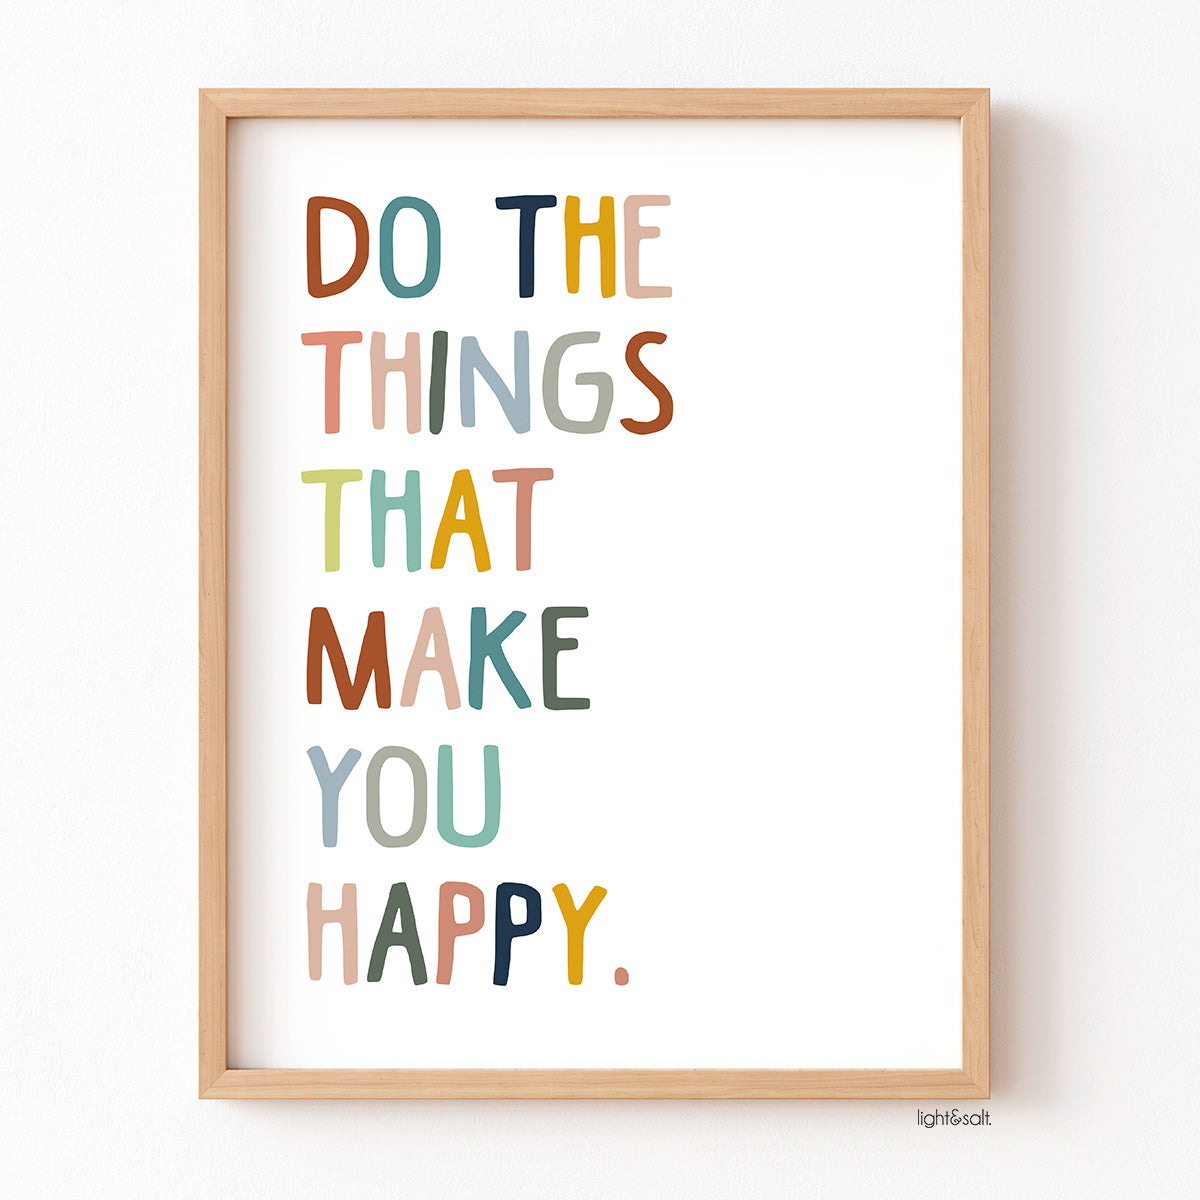 Do the things that make you happy poster